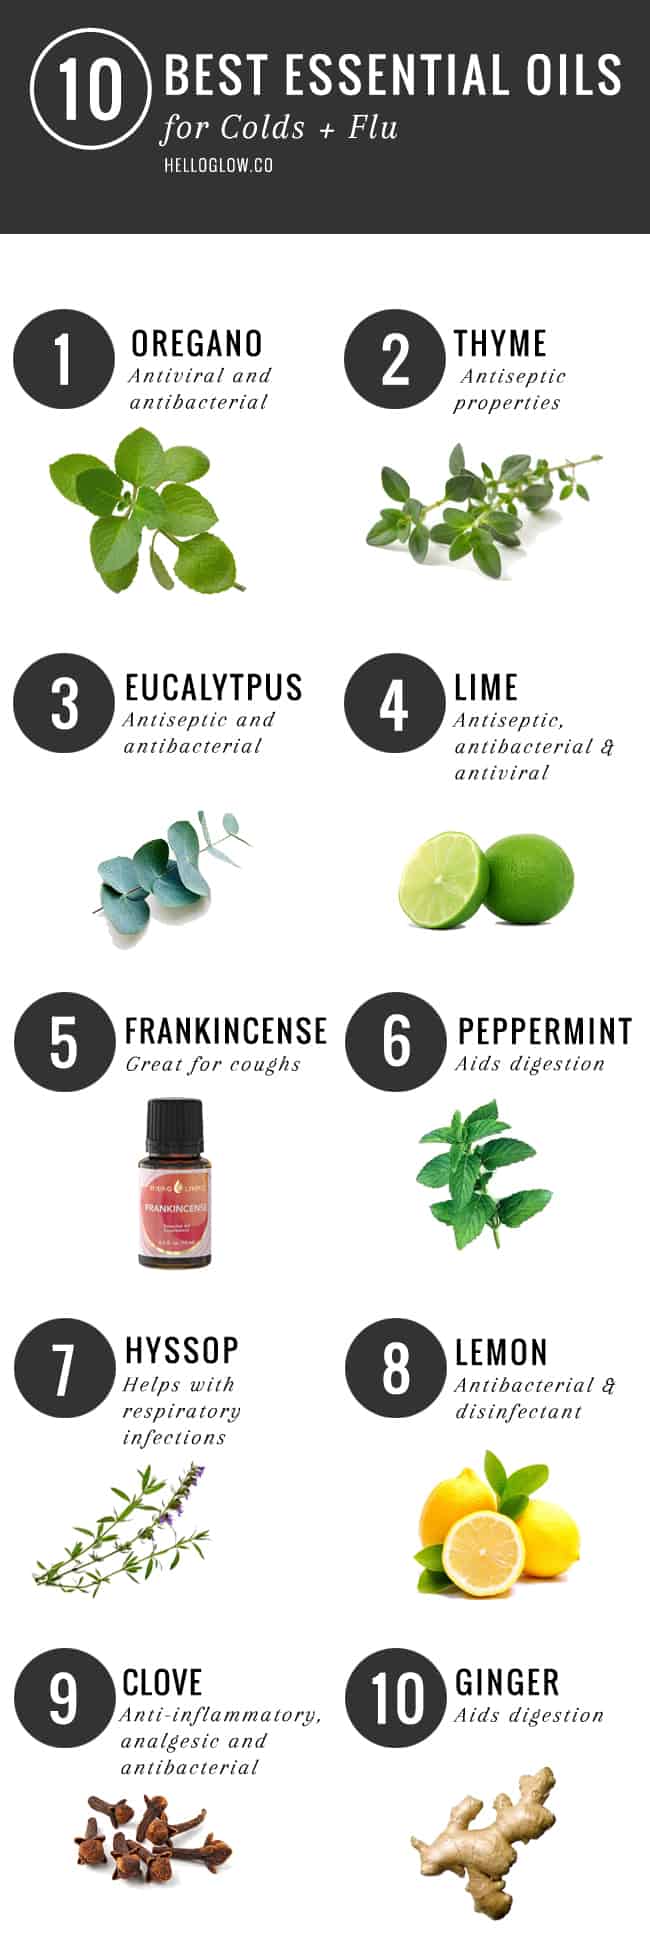 10 Best Essential Oils for Cold & Flu